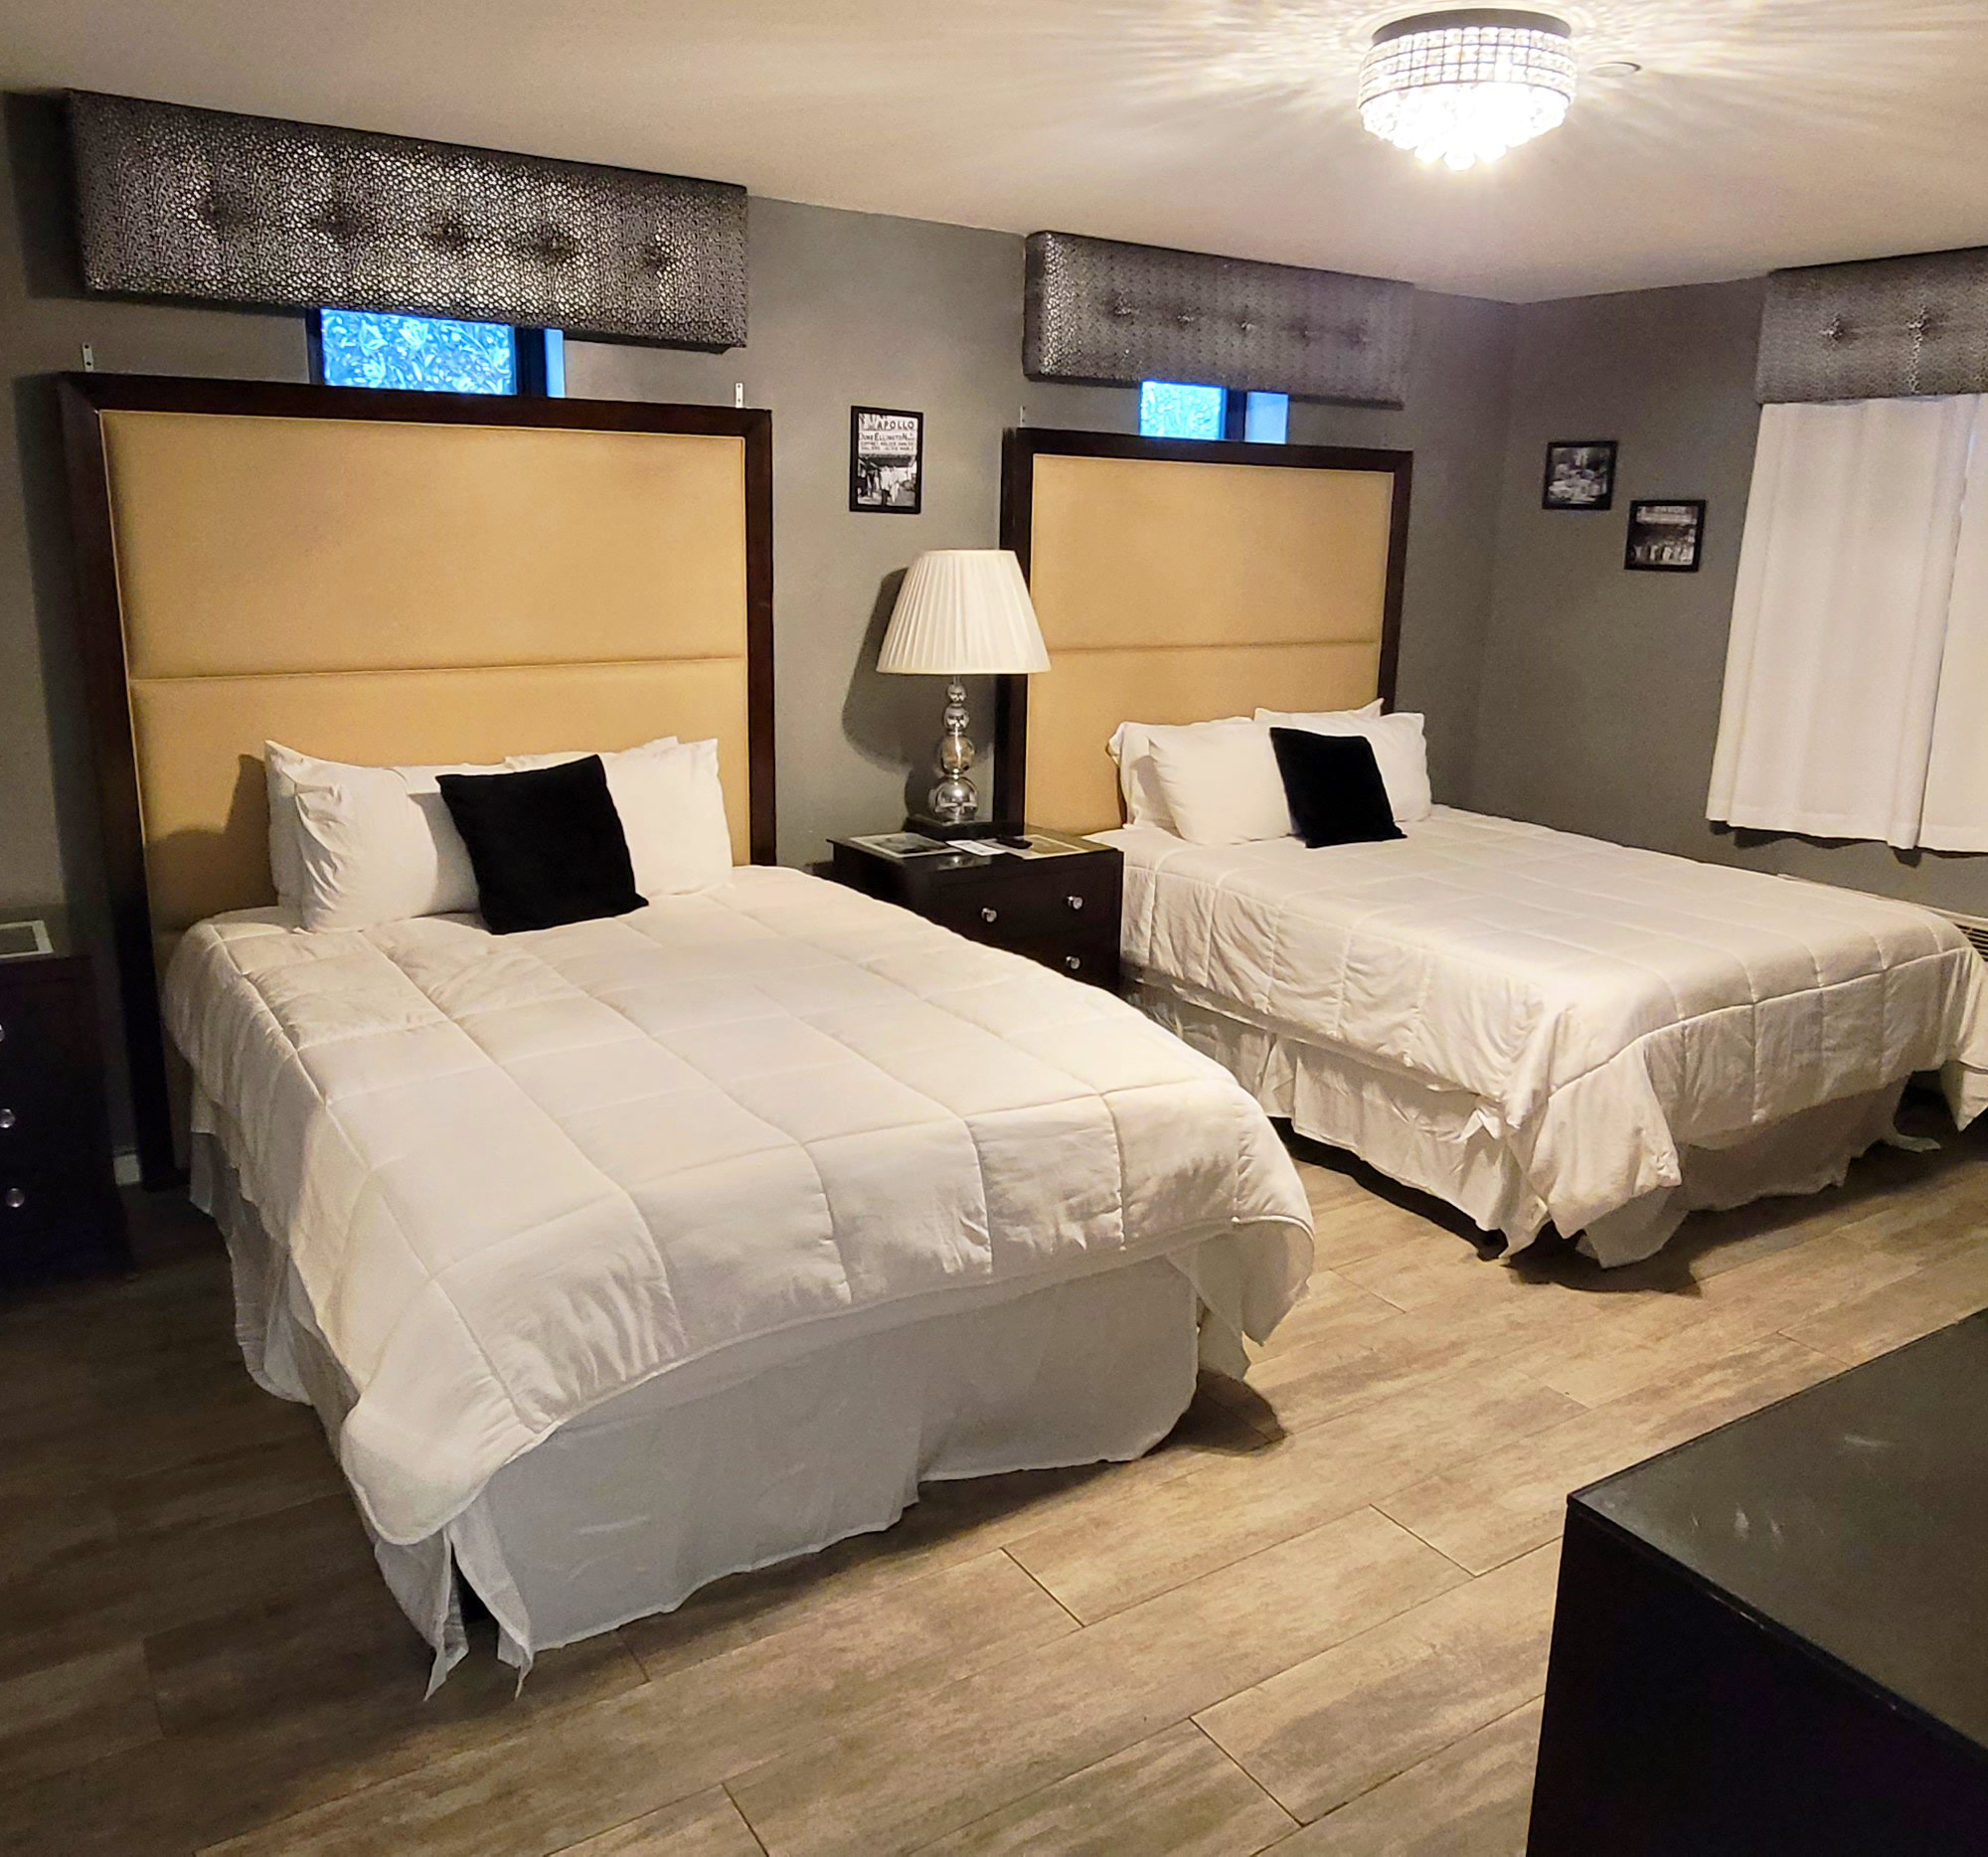 2 Queen size beds with white sheets 2 white pillows and one black pillow with a tan tufed headboard in a room with tan carpet and grey walls.